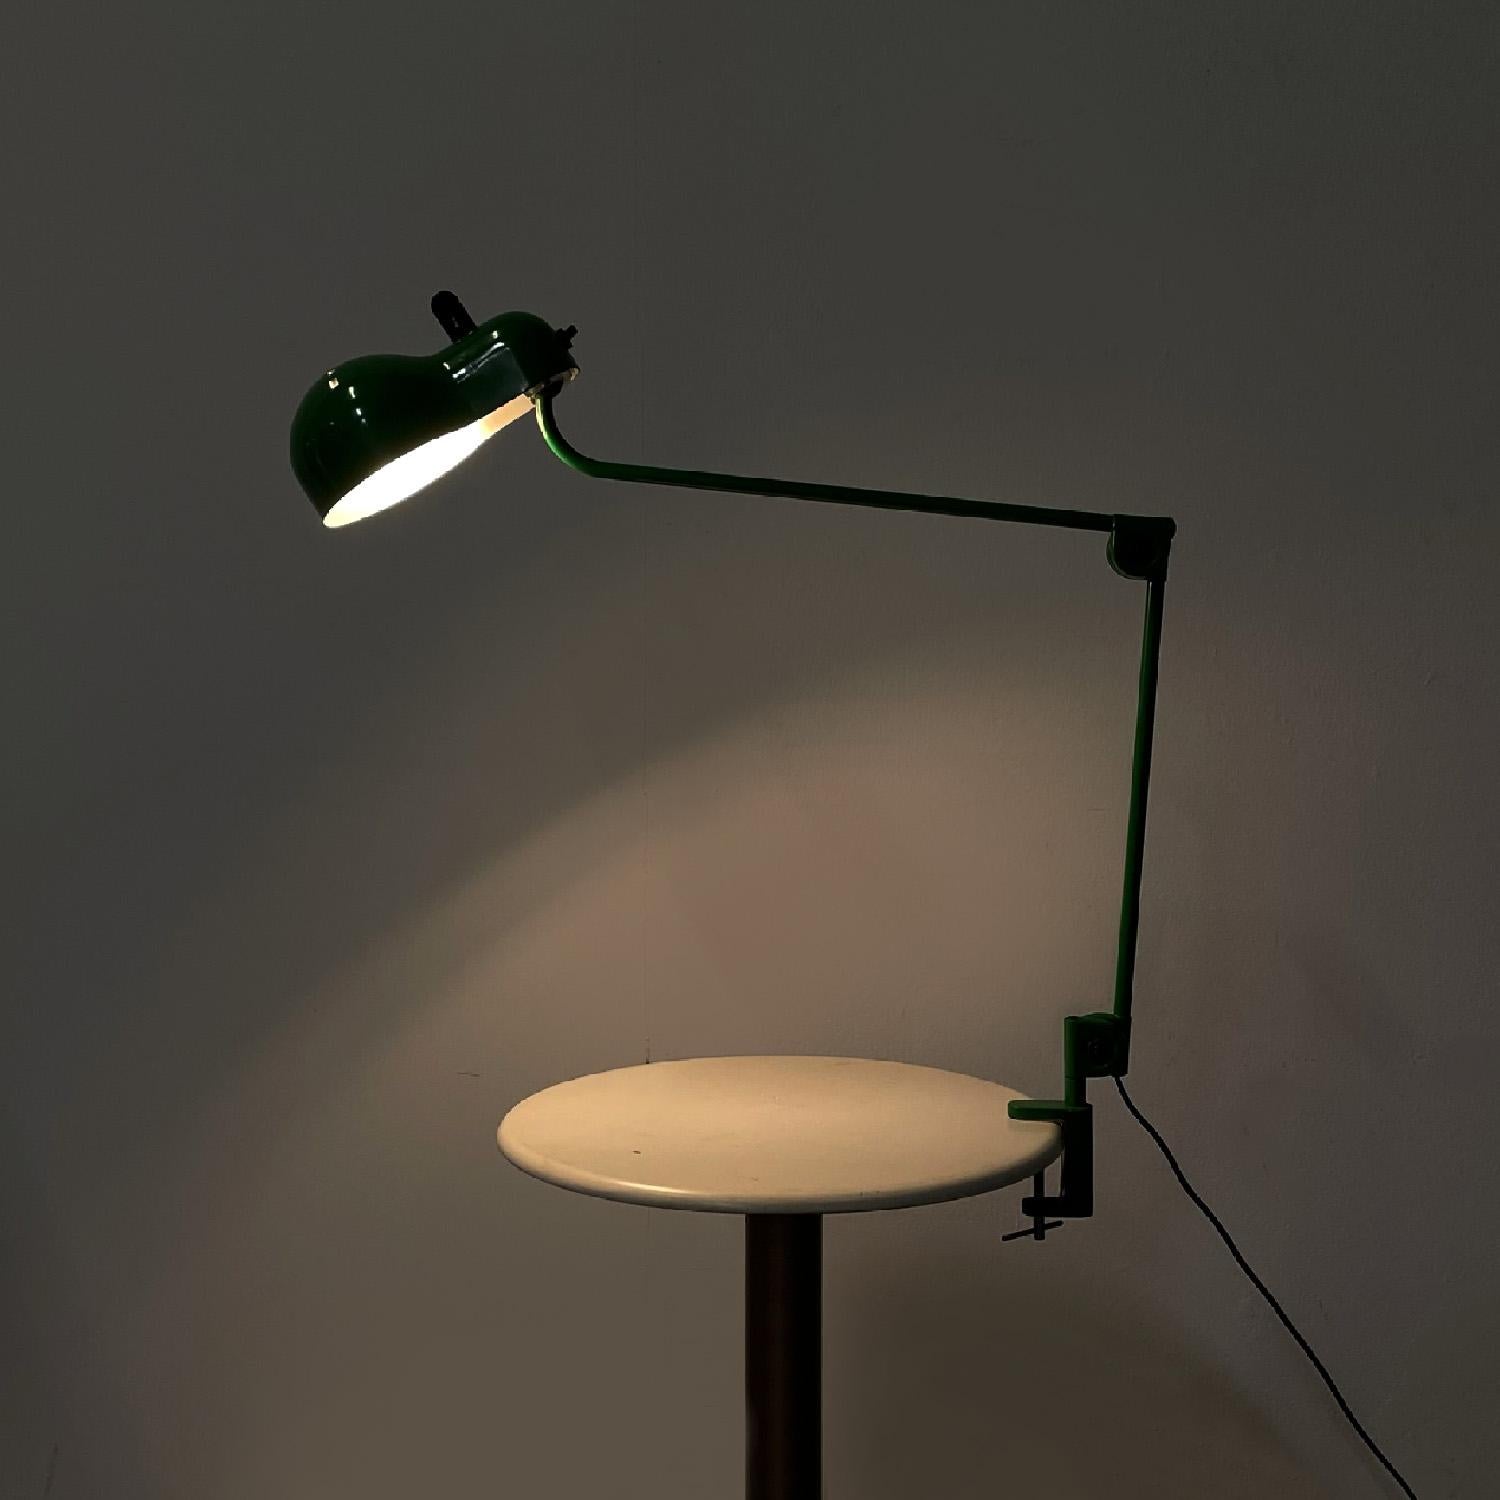 Italian modern green table lamp Topo by Joe Colombo for Stilnovo, 1970s
Table lamp mod. Topo with clamp. The structure is adjustable, the lampshade has a black plastic handle to direct it. The lamp is made of green painted metal with a glossy finish